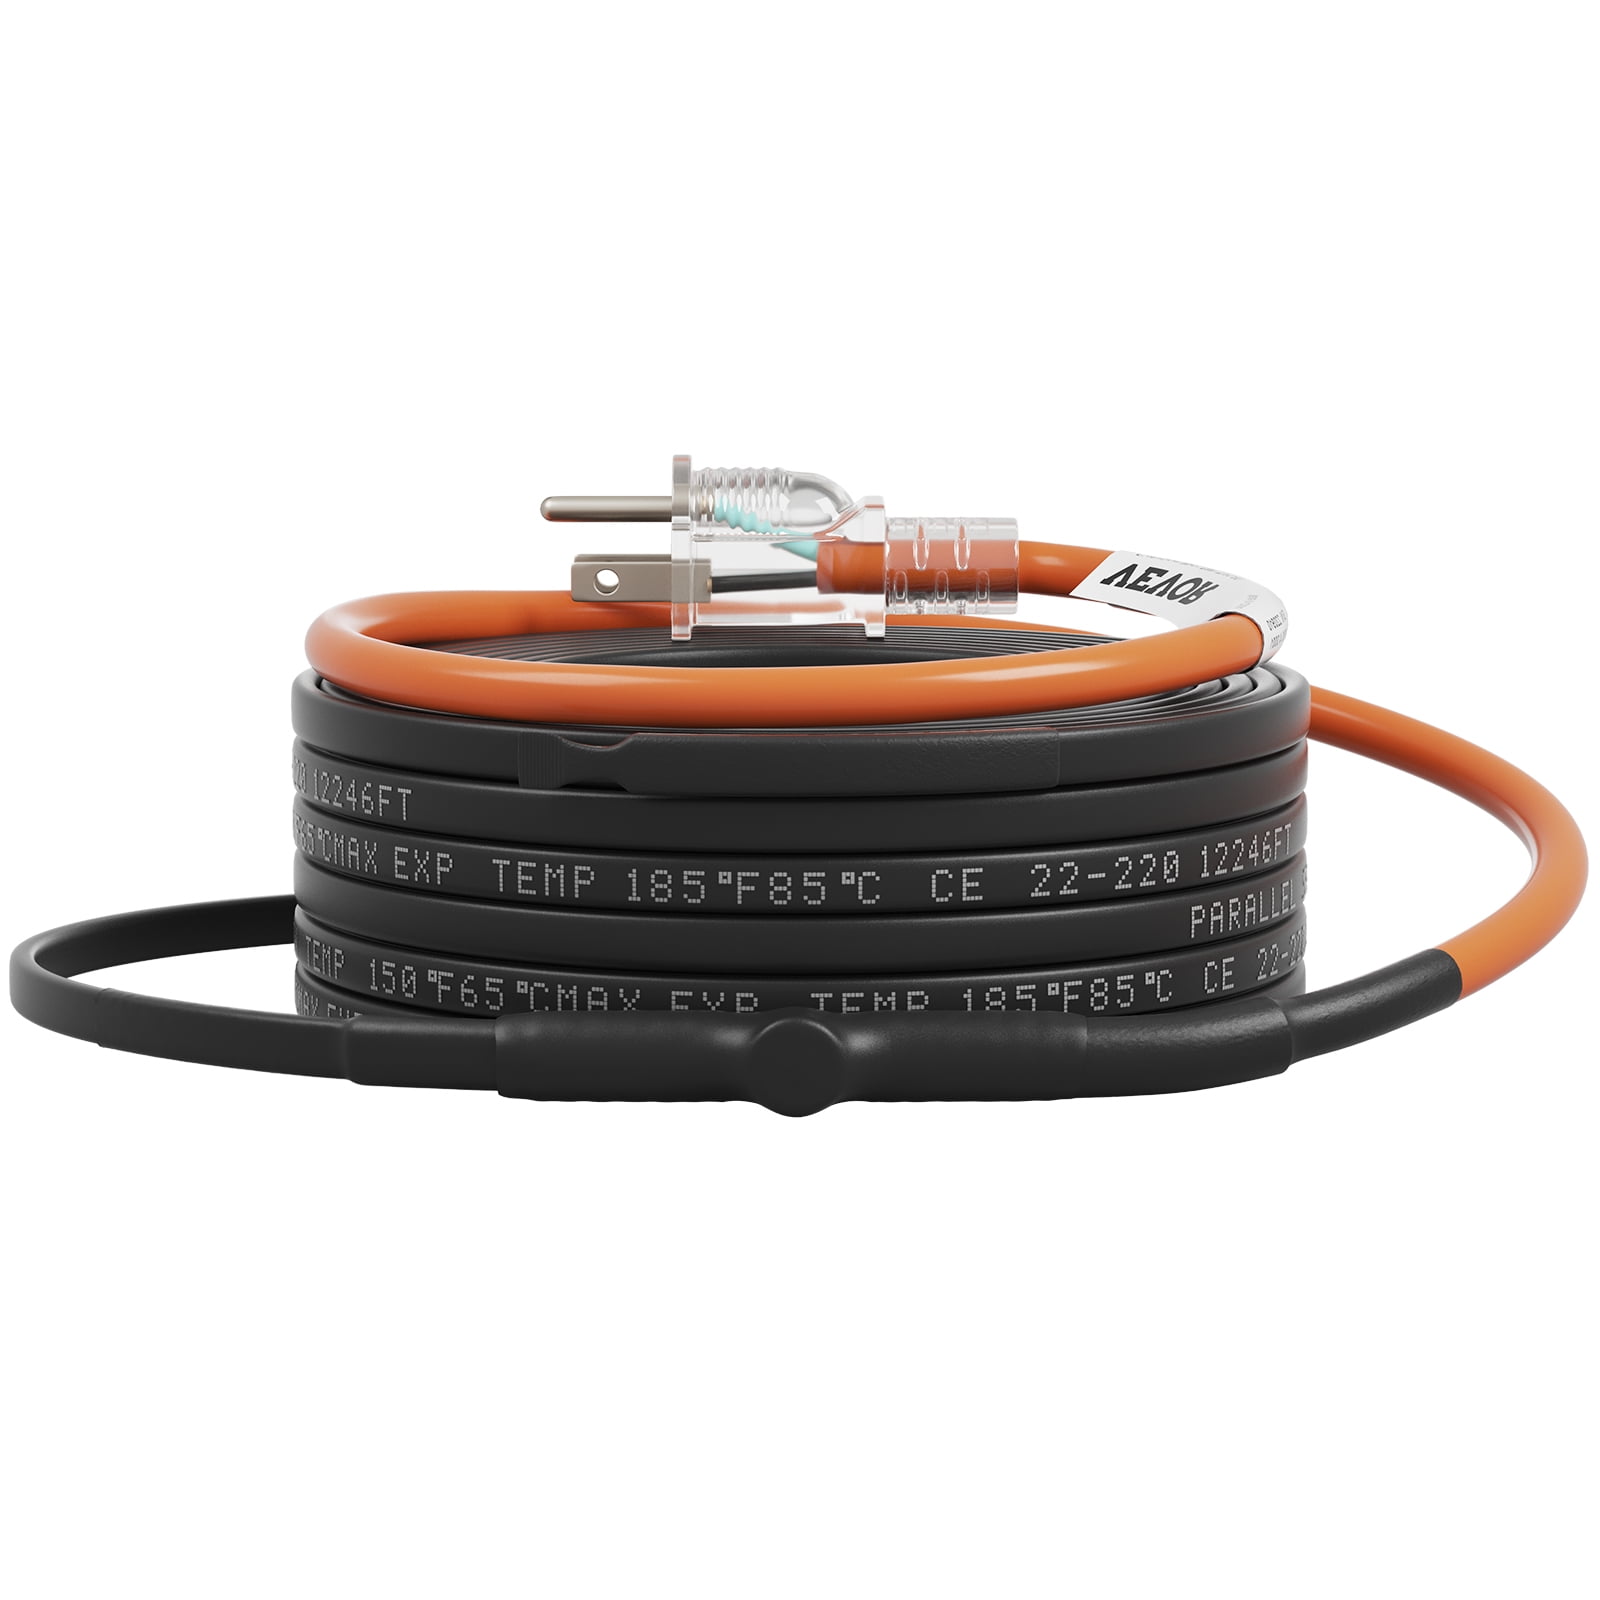 VEVOR 999-in x 30-ft Pipe Heat Cable at